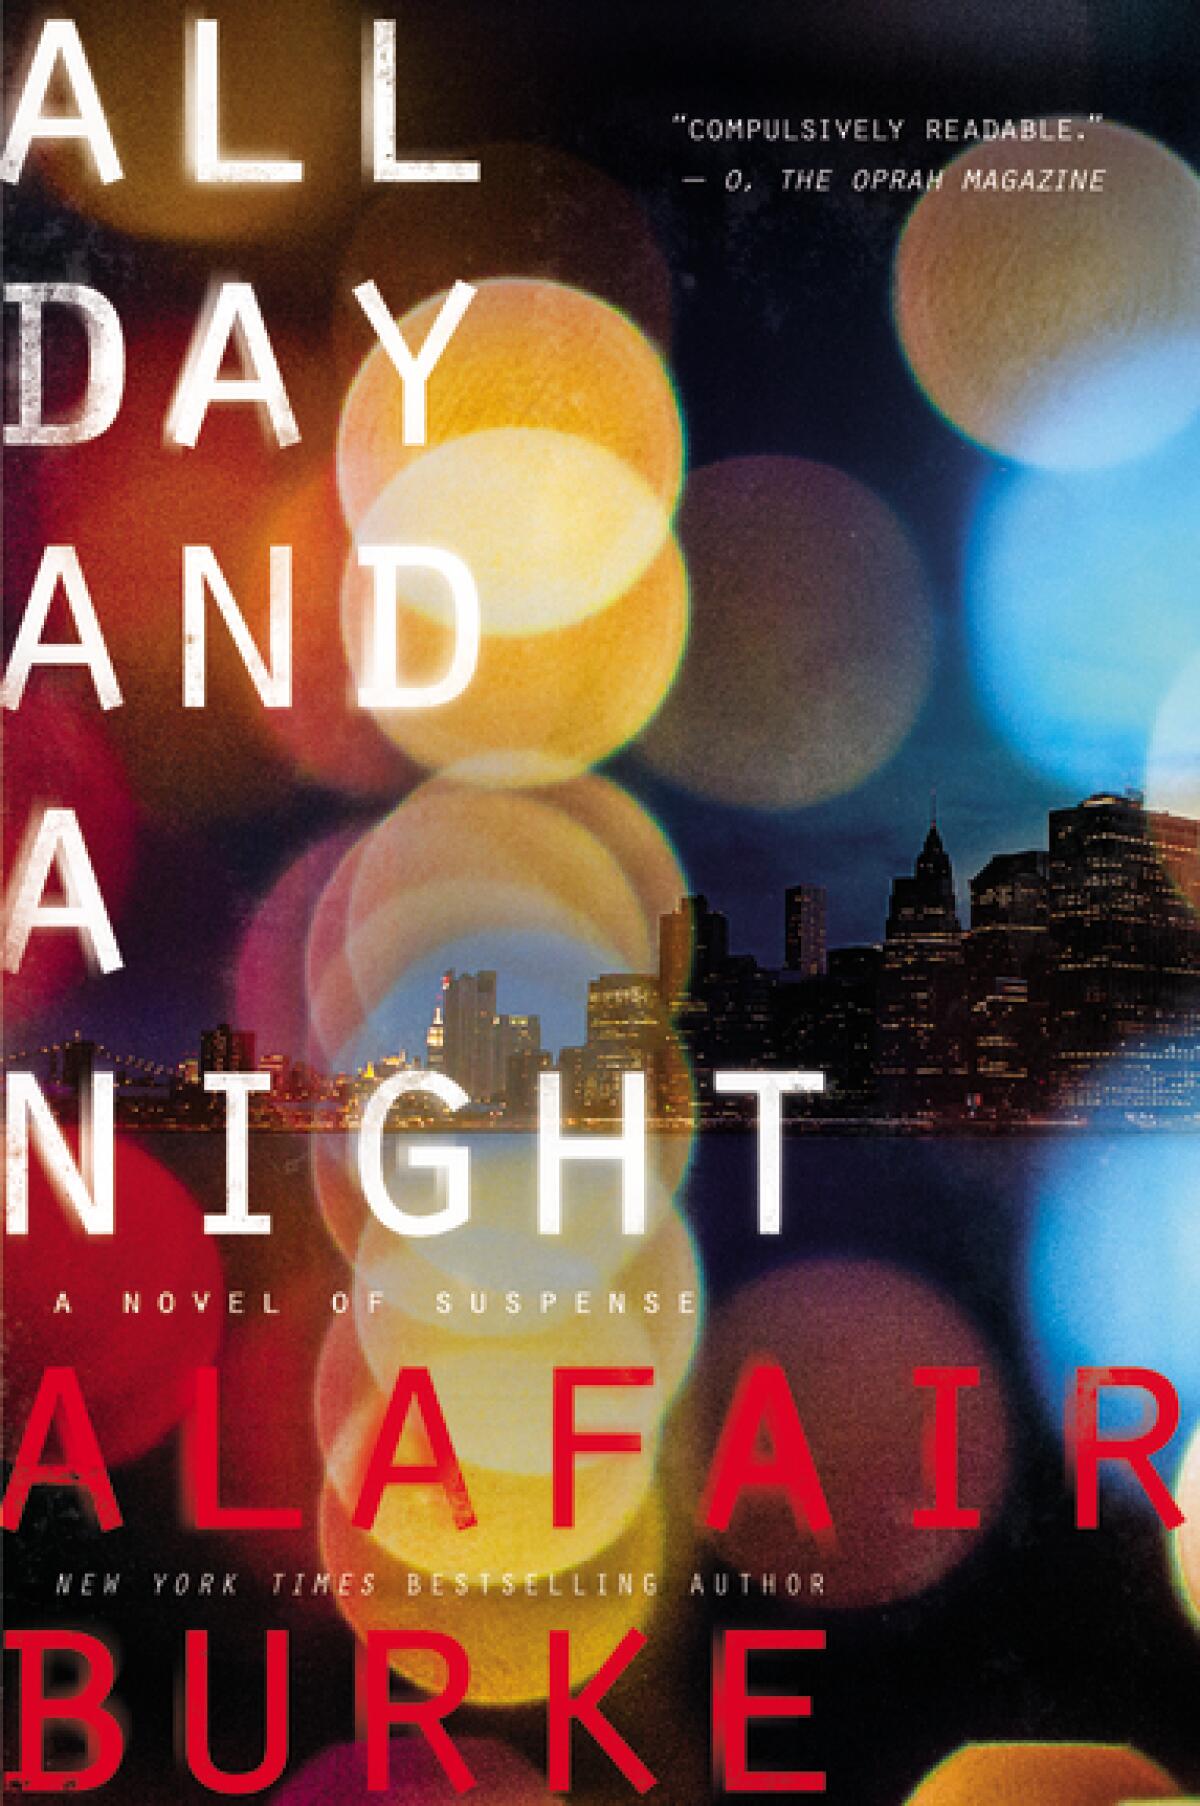 "All Day and a Night," by Alafair Burke